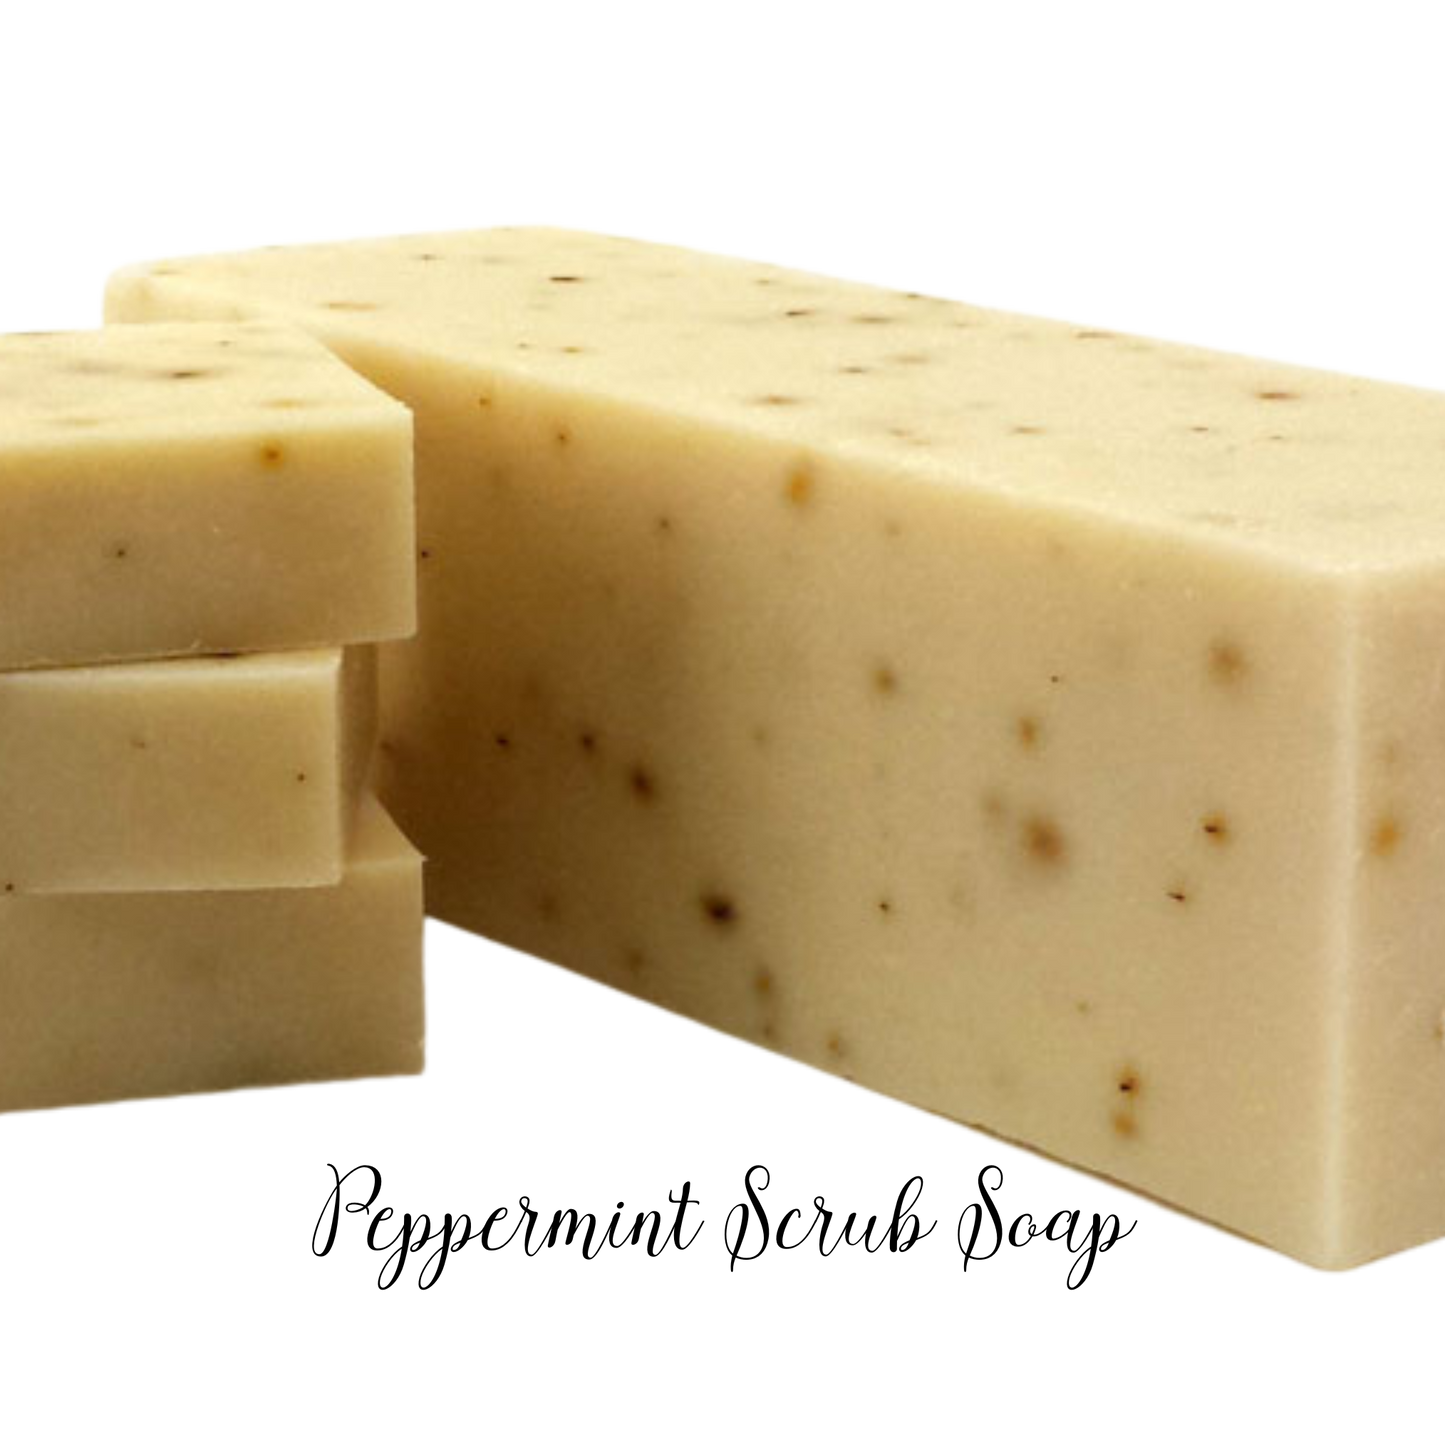 Pure sweet peppermint fragrance oil. Very strong. Contains peppermint leaves to exfoliate. 4.5  bar soap